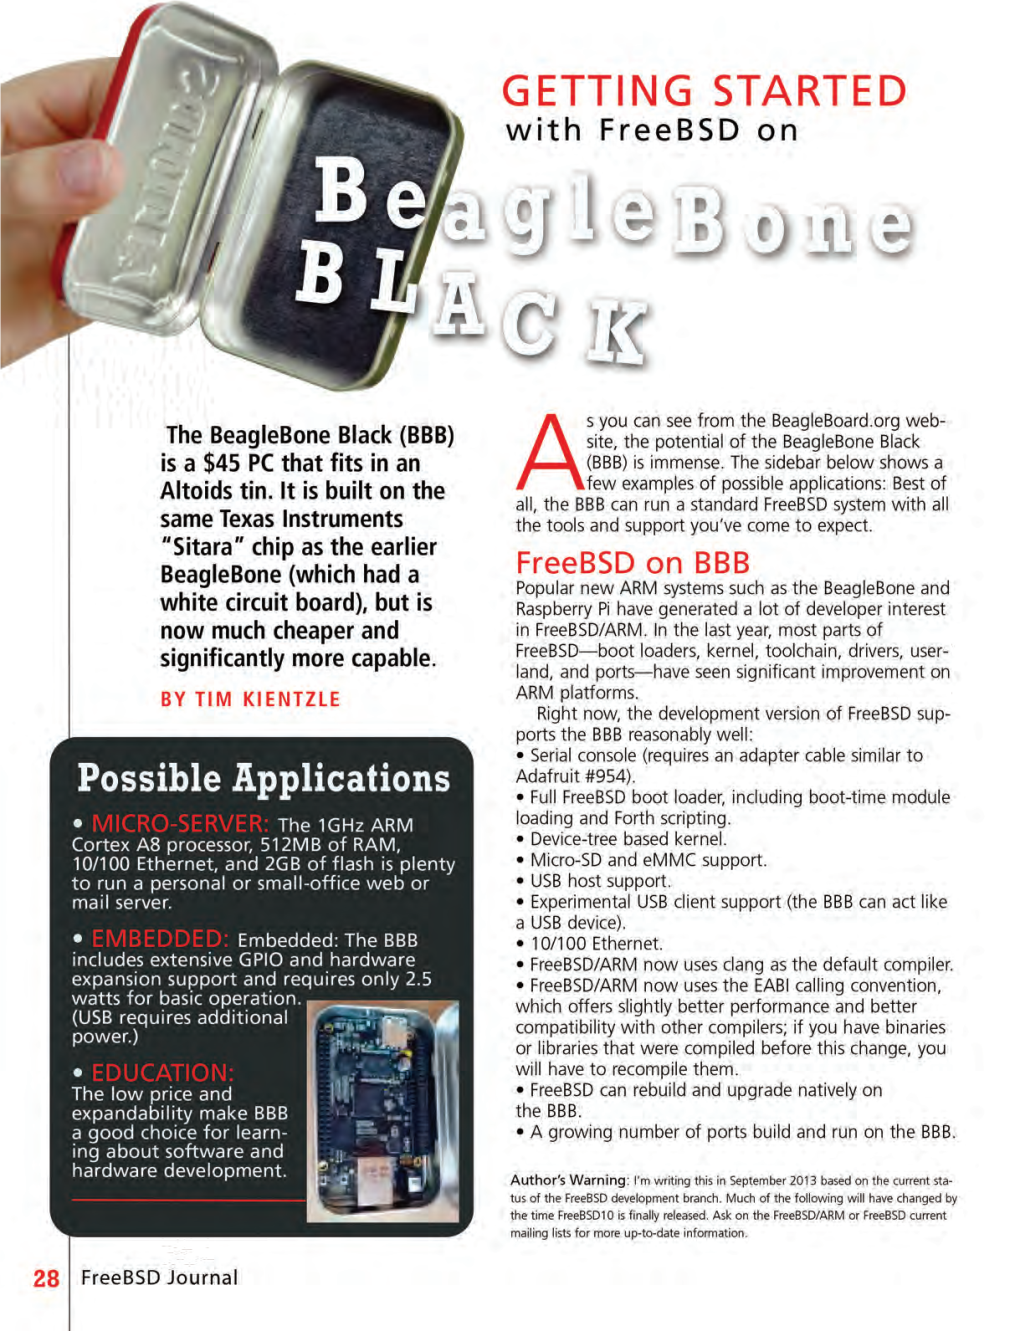 Getting Started with Freebsd on Beaglebone Black